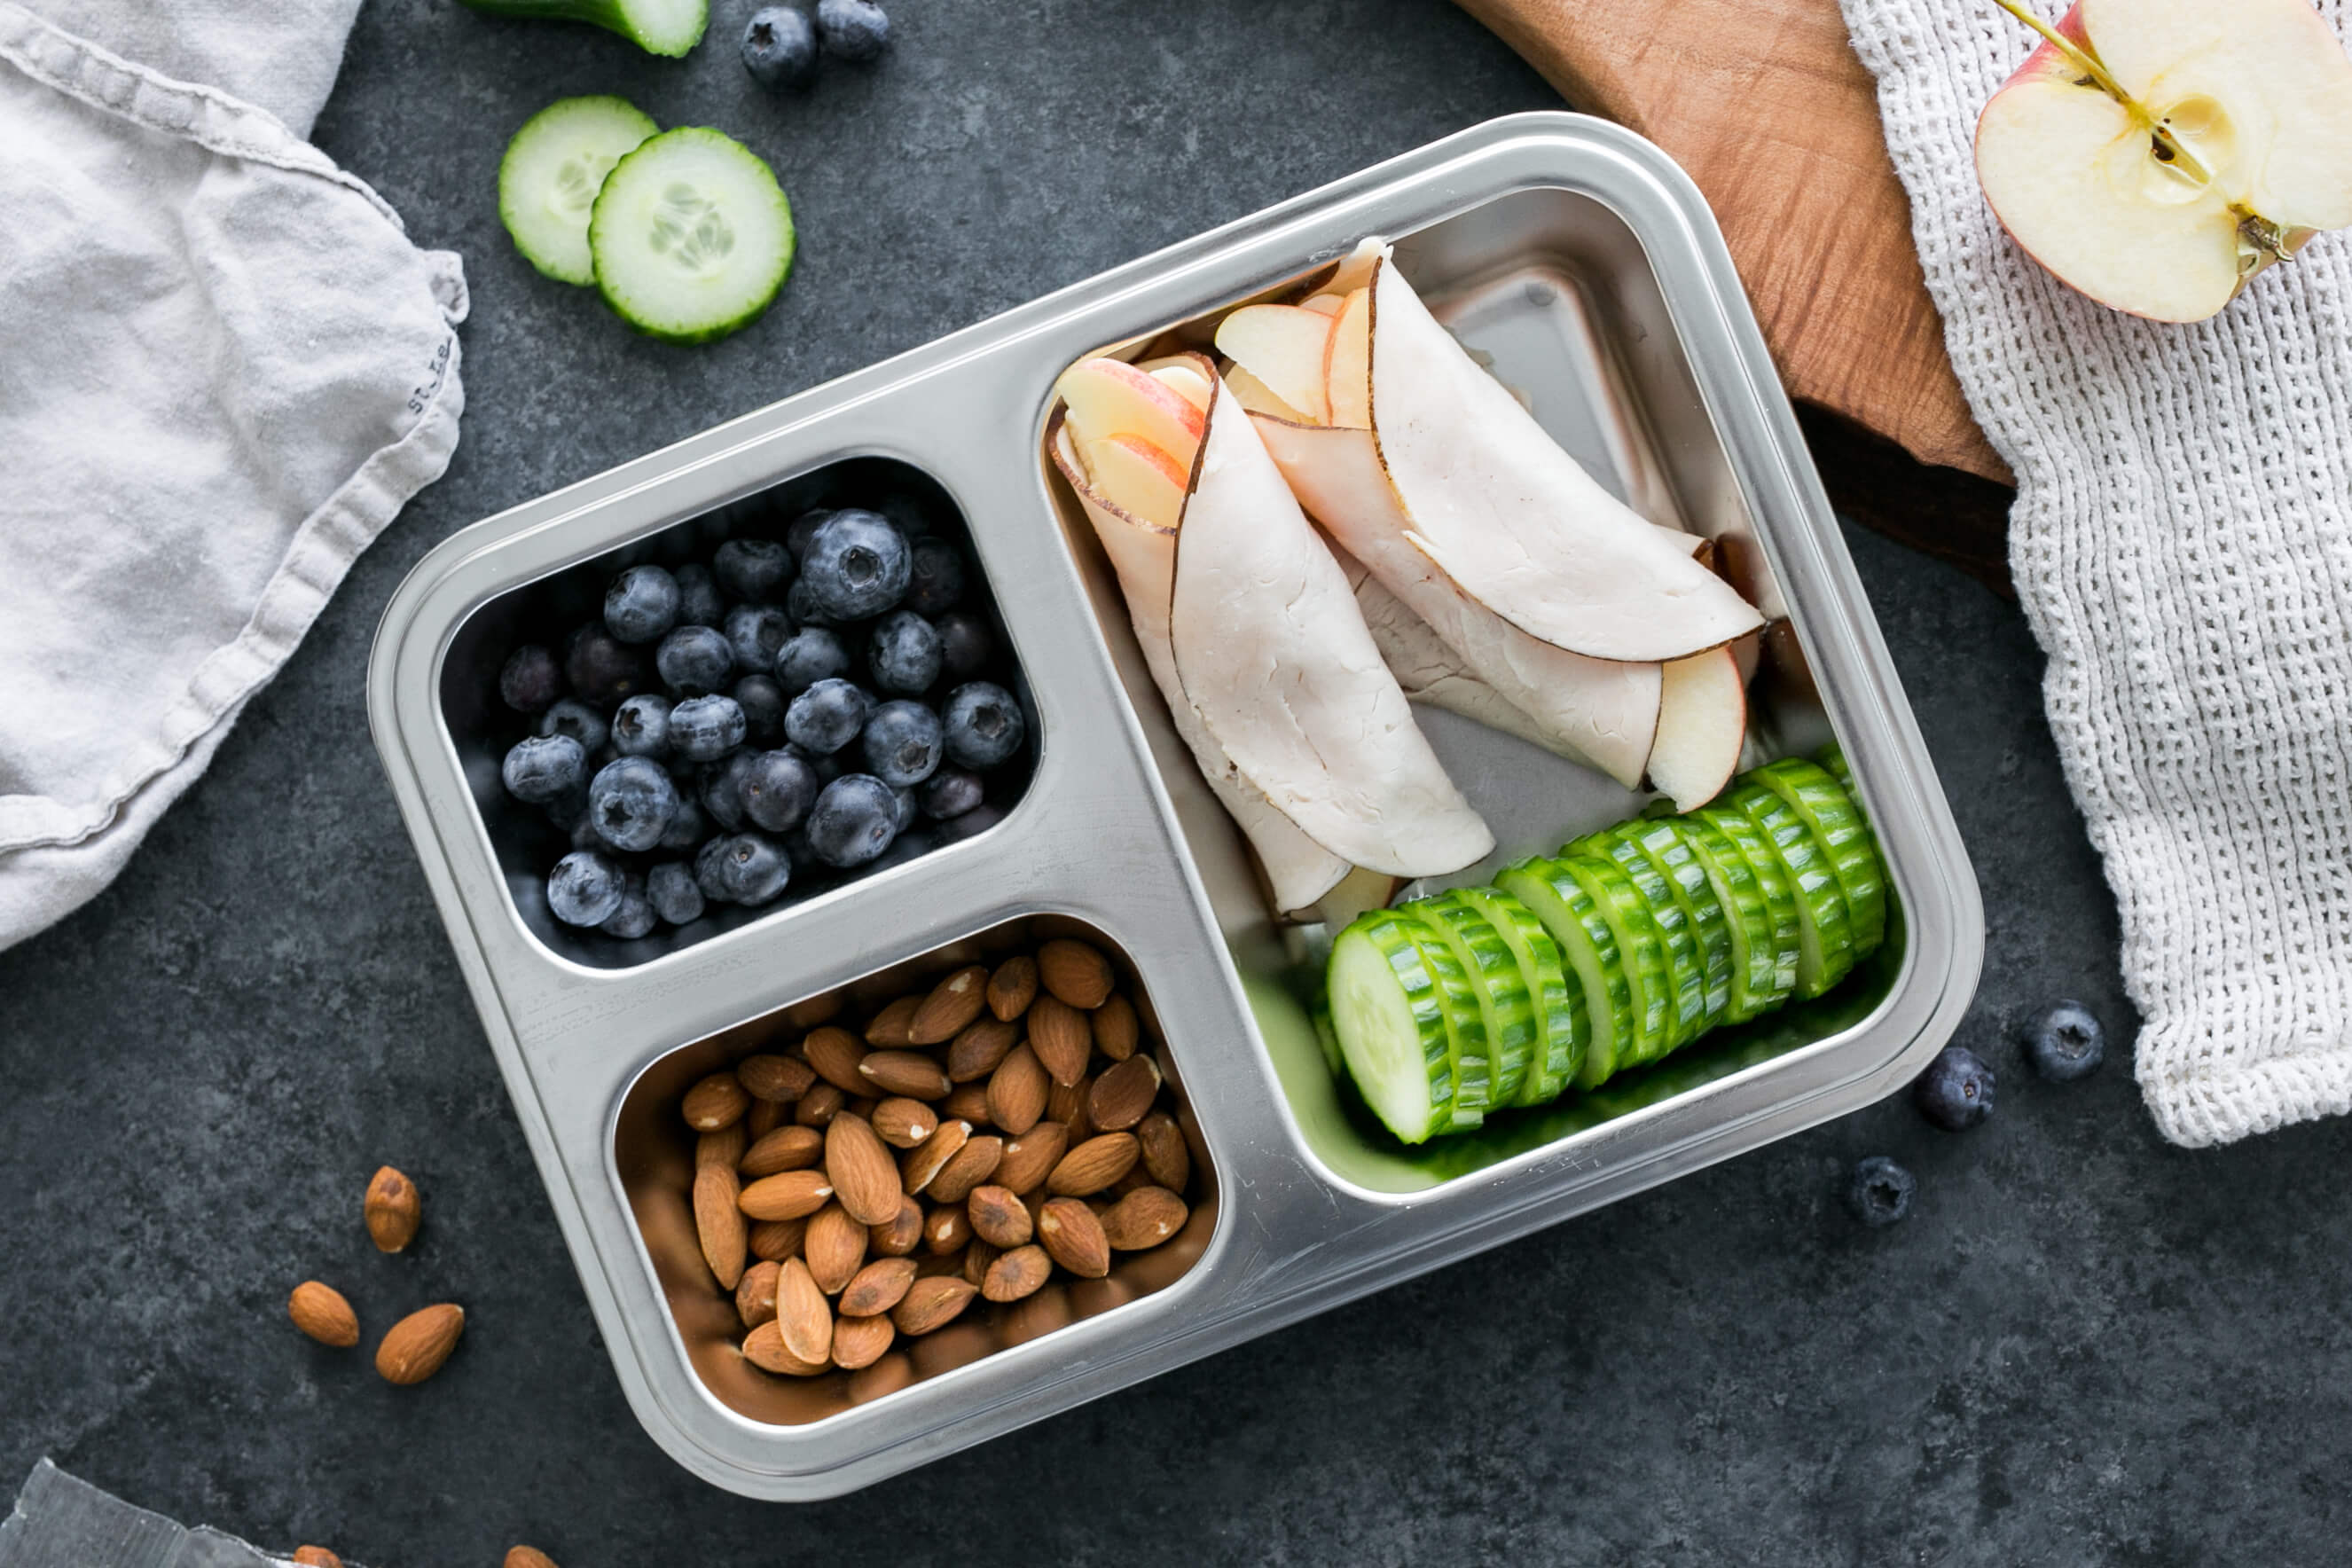 20 Meal Ideas to Support Student-Athletes: Turkey Wraps with Almonds, Cucumbers & Blueberries